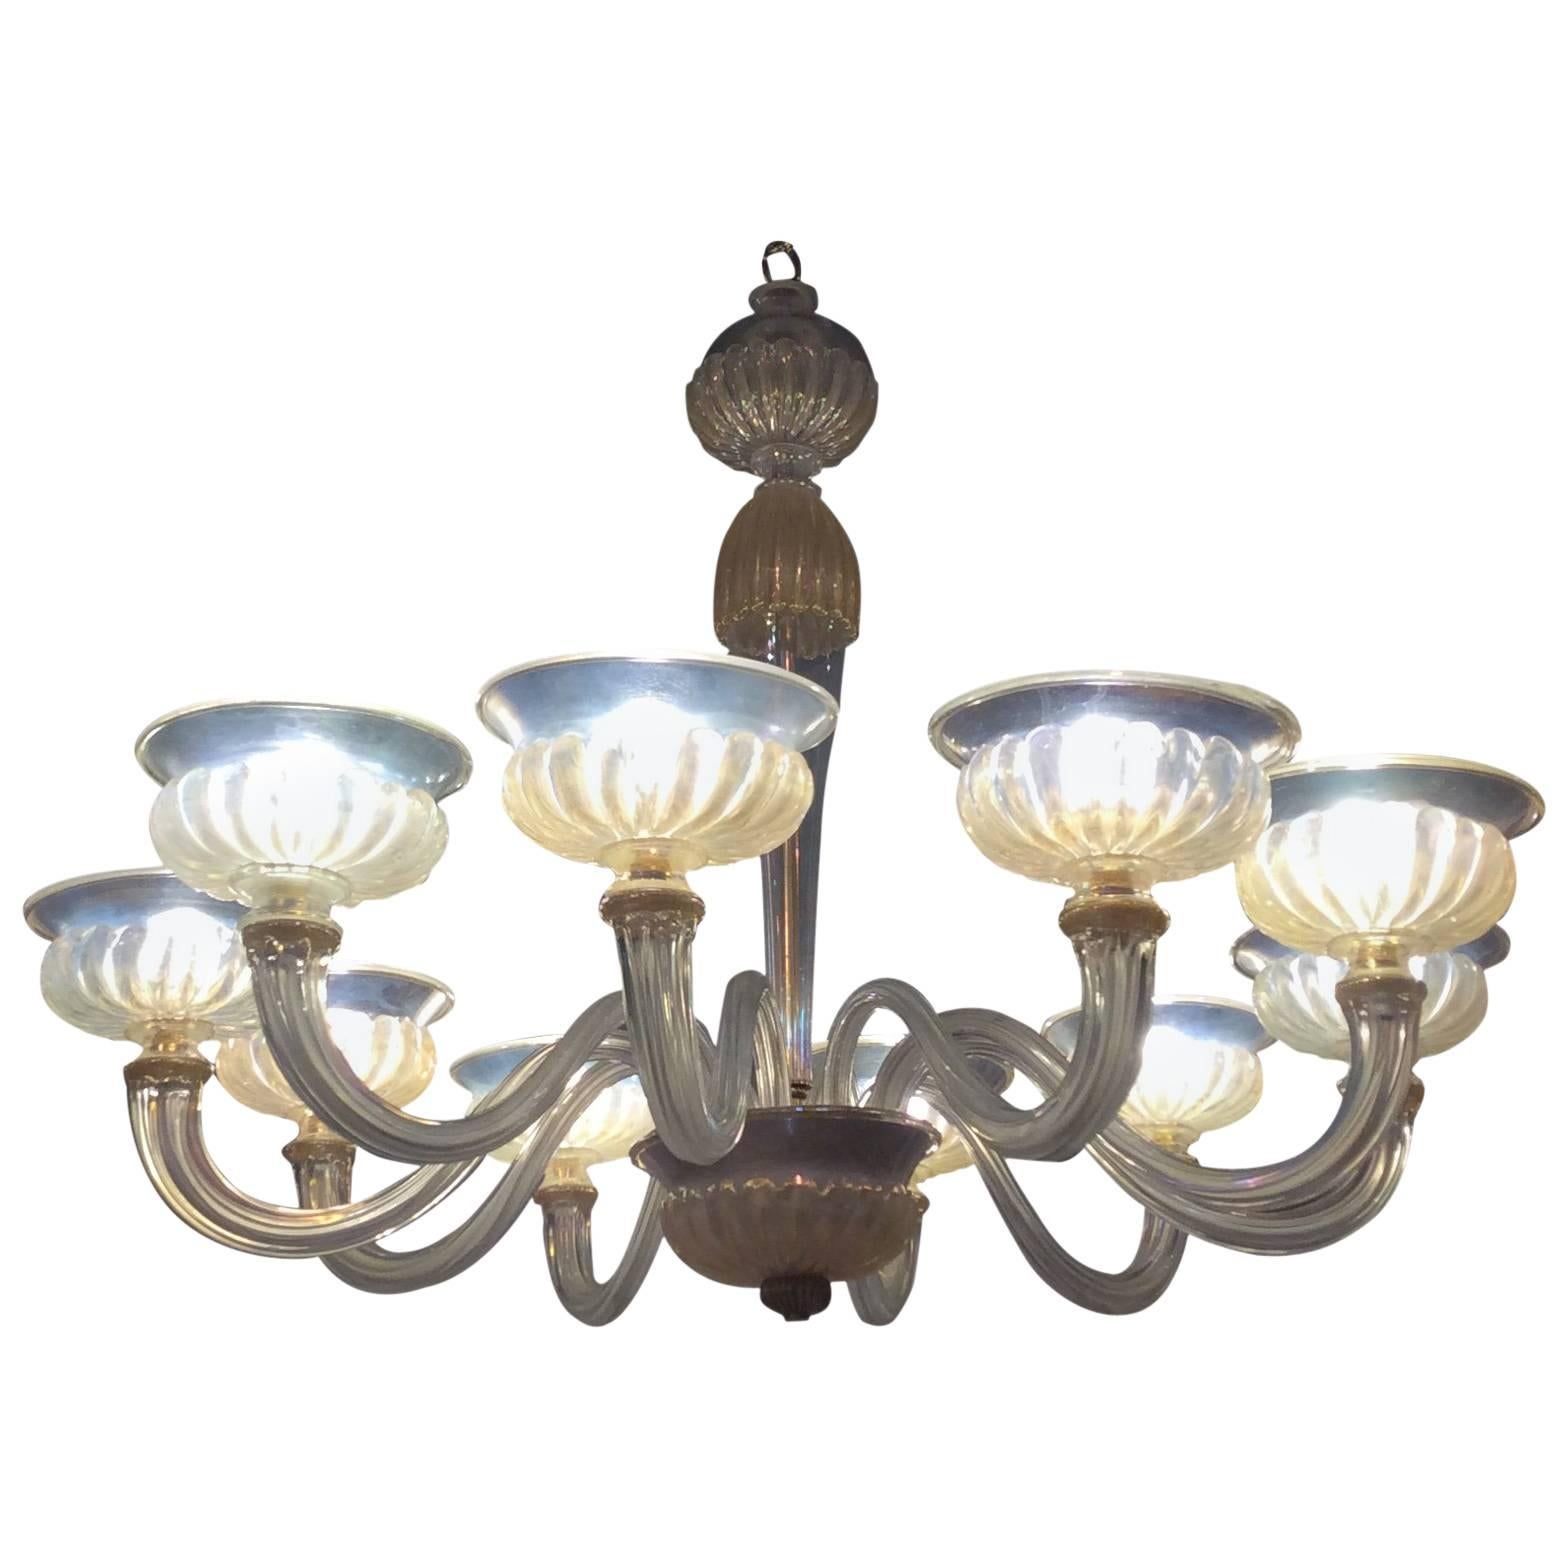 Maison Veronese Chandelier Attributed to André Arbus, Opaline Glass, circa 1940 For Sale